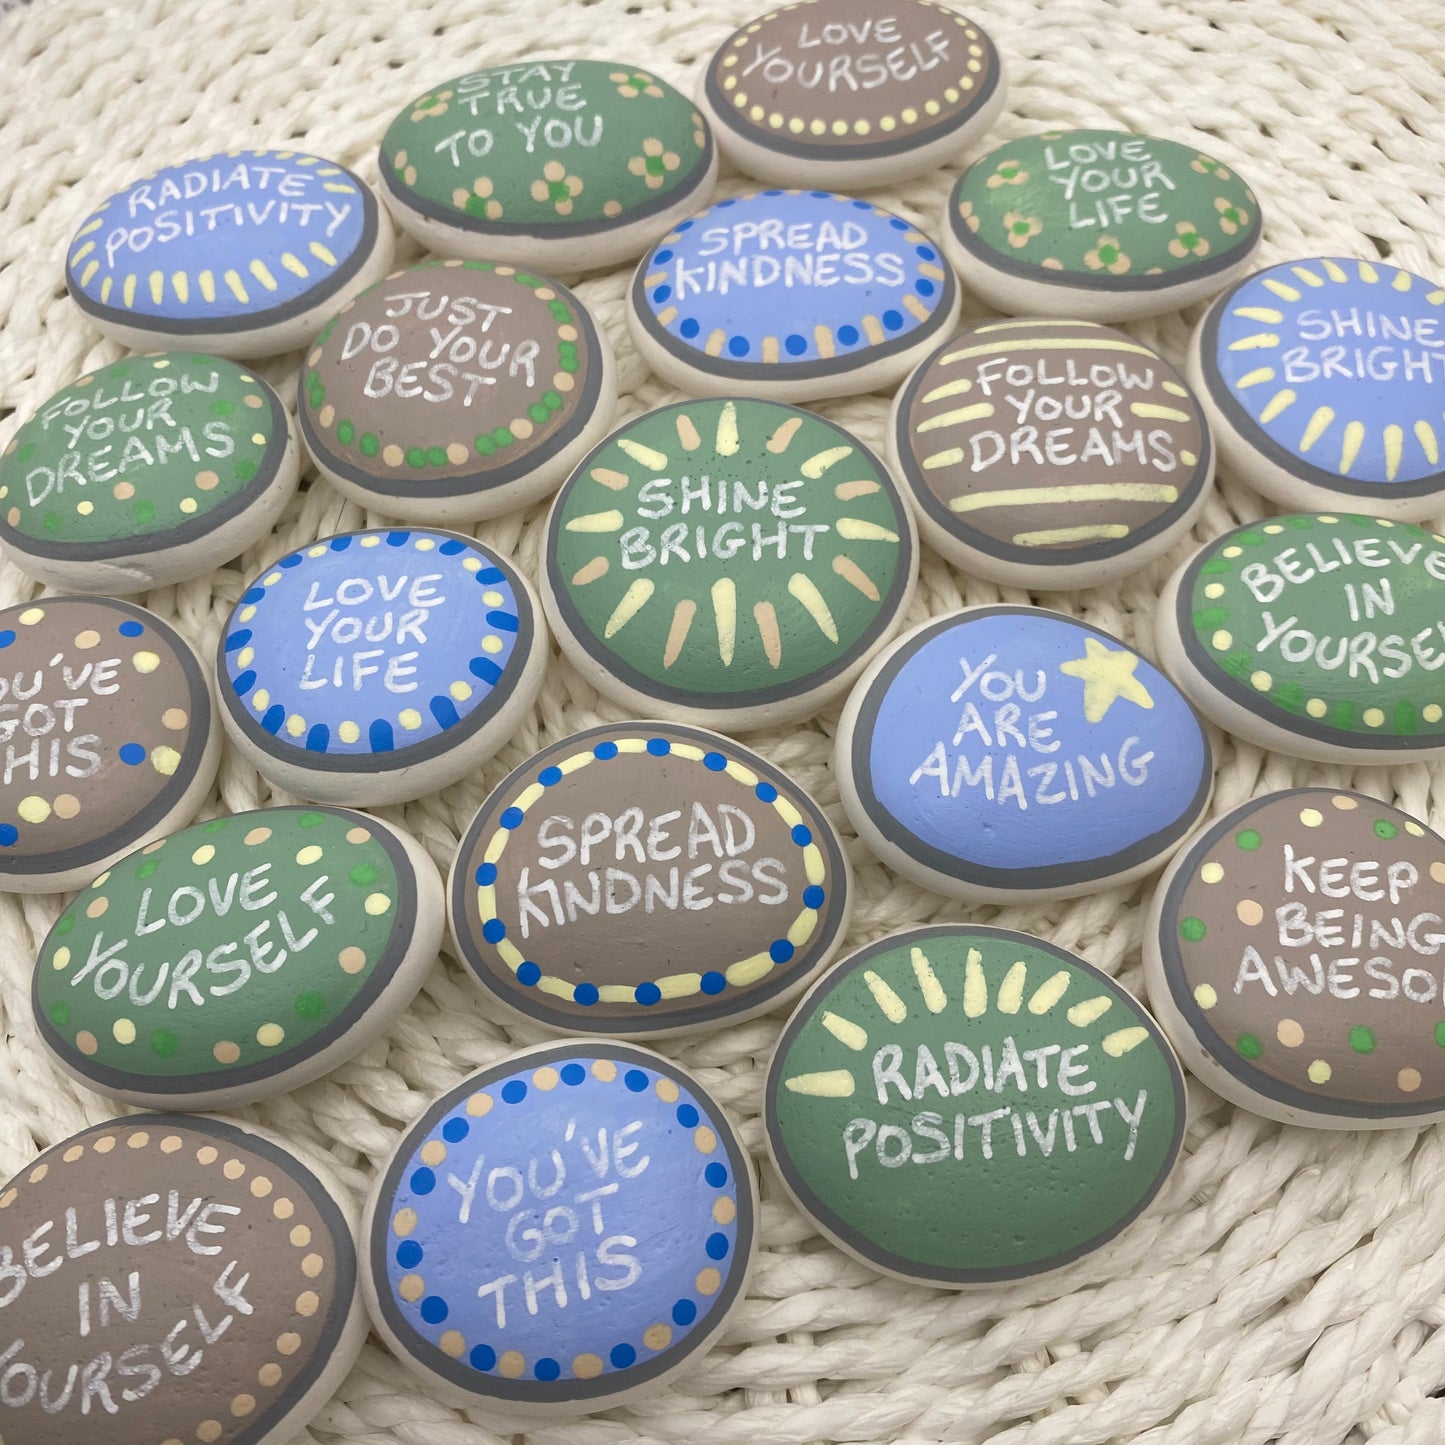 Lots of Pastel Blue, Green and Beige Hand painted pebbles with uplifting affirmations written on